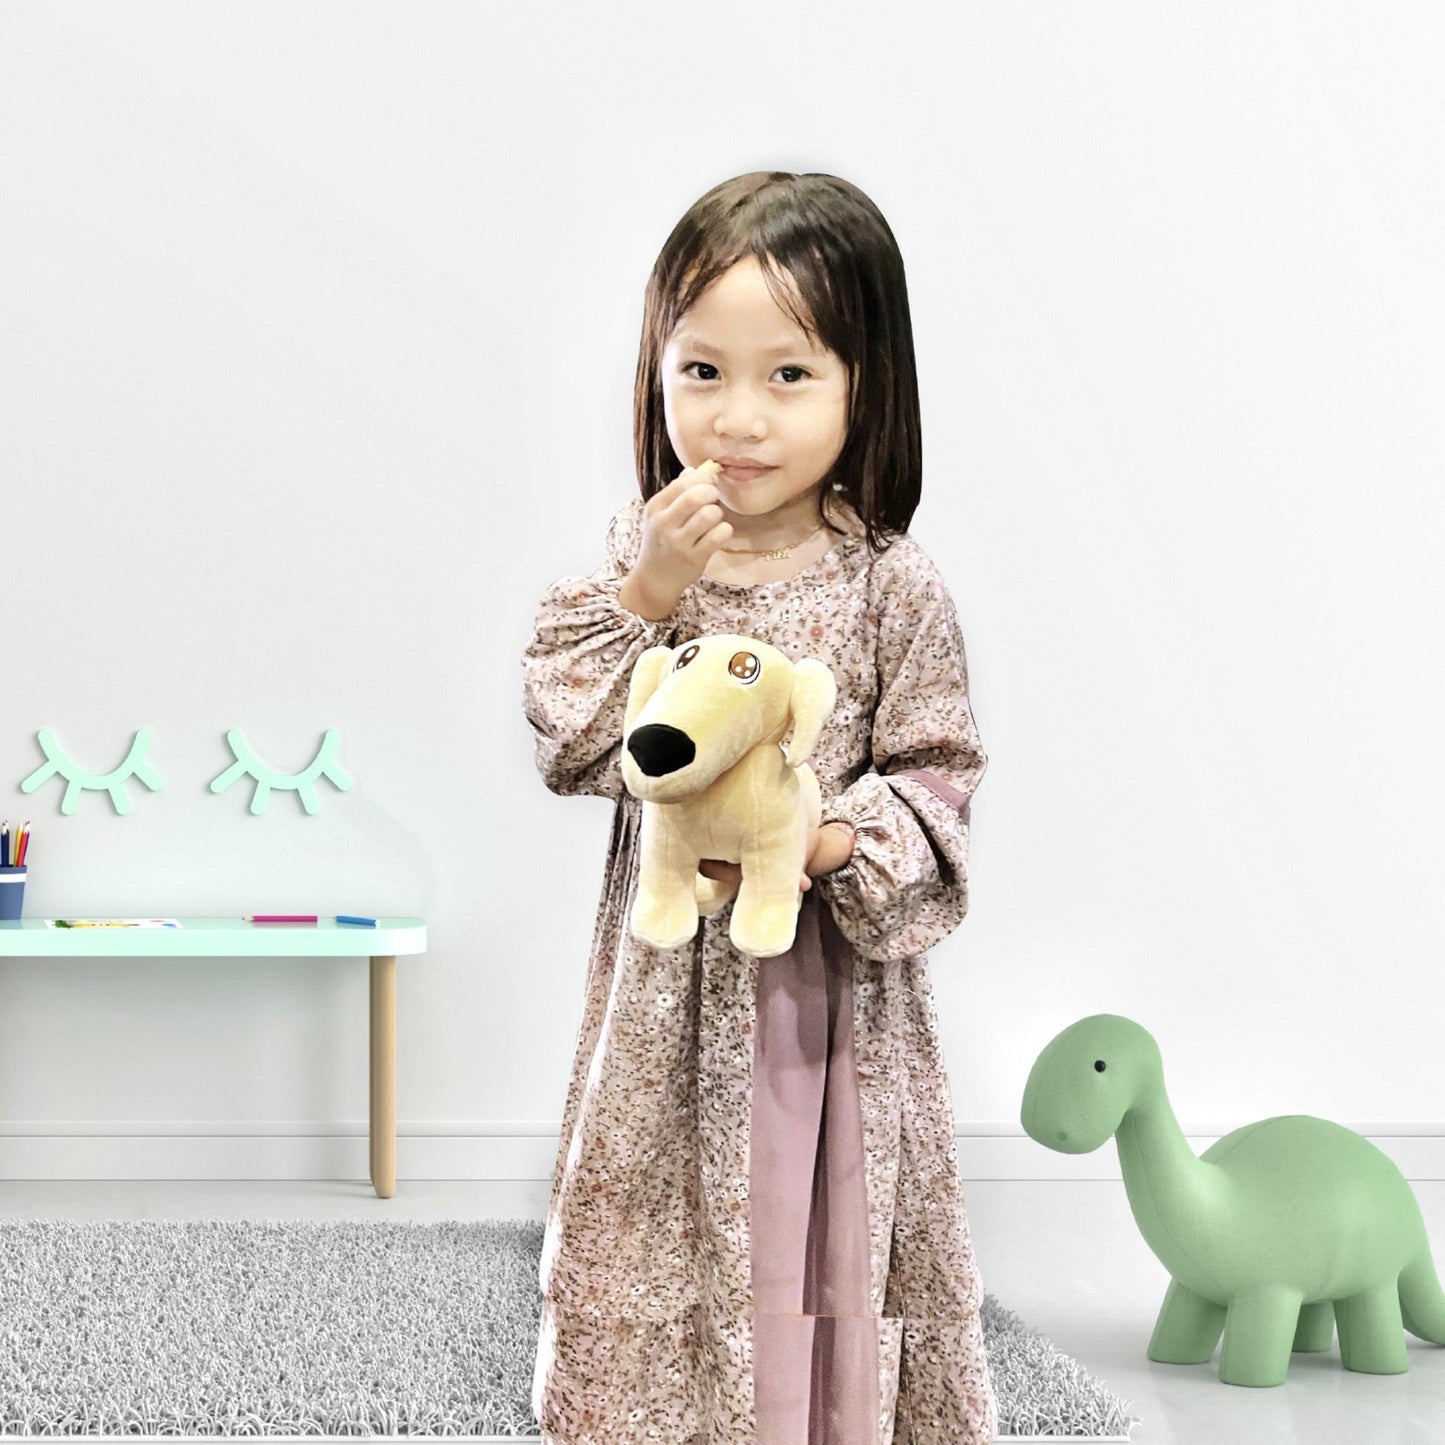 Cute, young girl in a nursery playing with the Singing Borzoi Long Nose Meme Dog plushie/